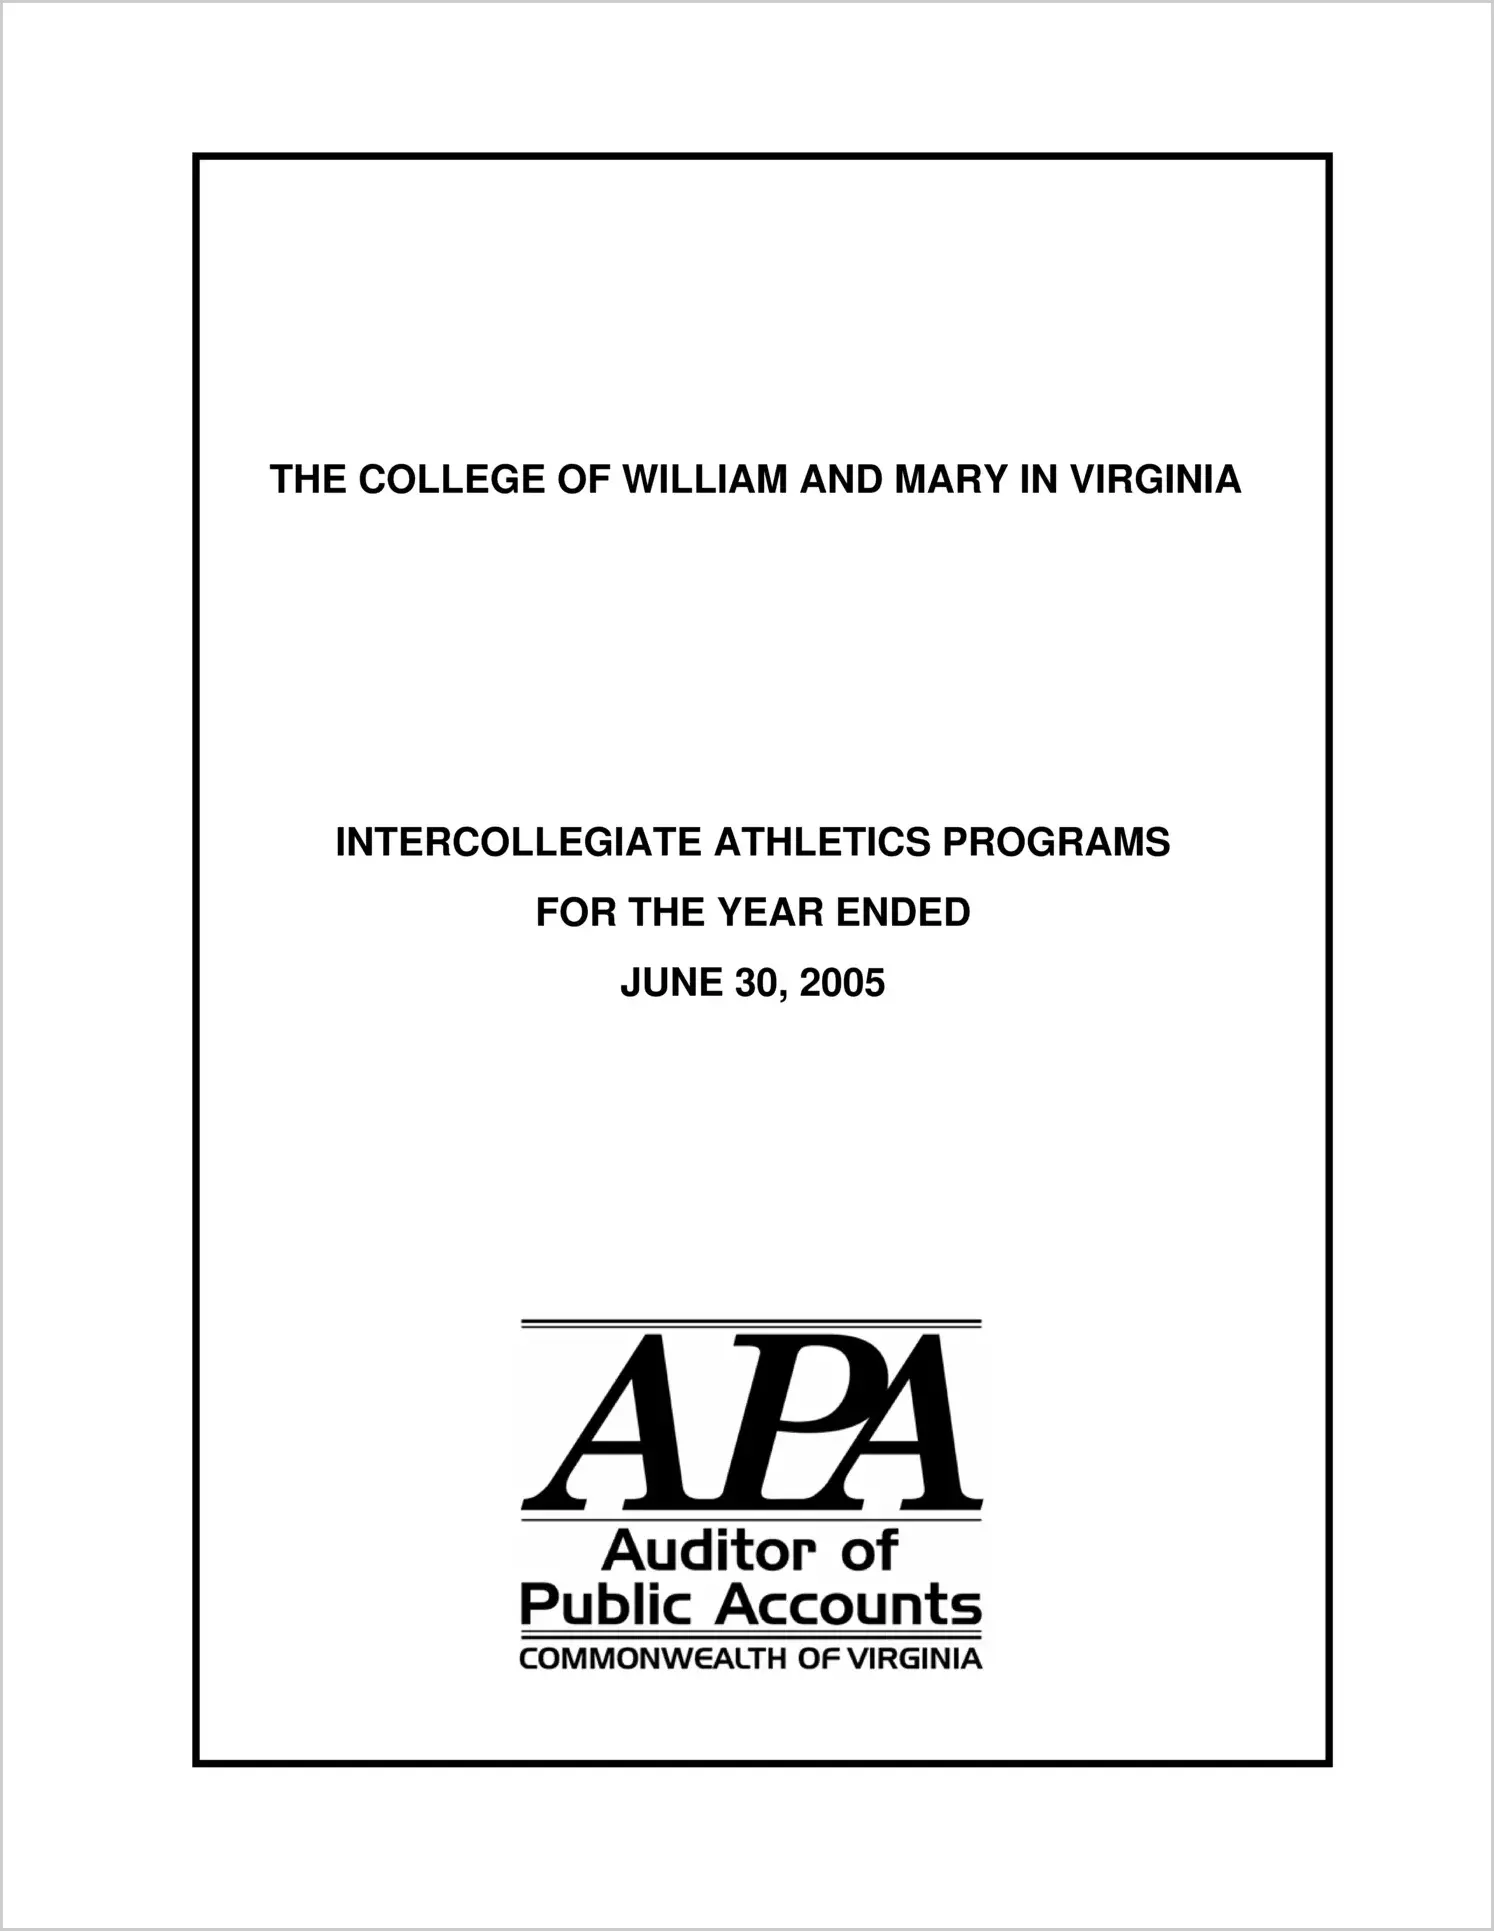 The College of William and Mary Intercollegiate Athletics Programs for the year ended June 30, 2005